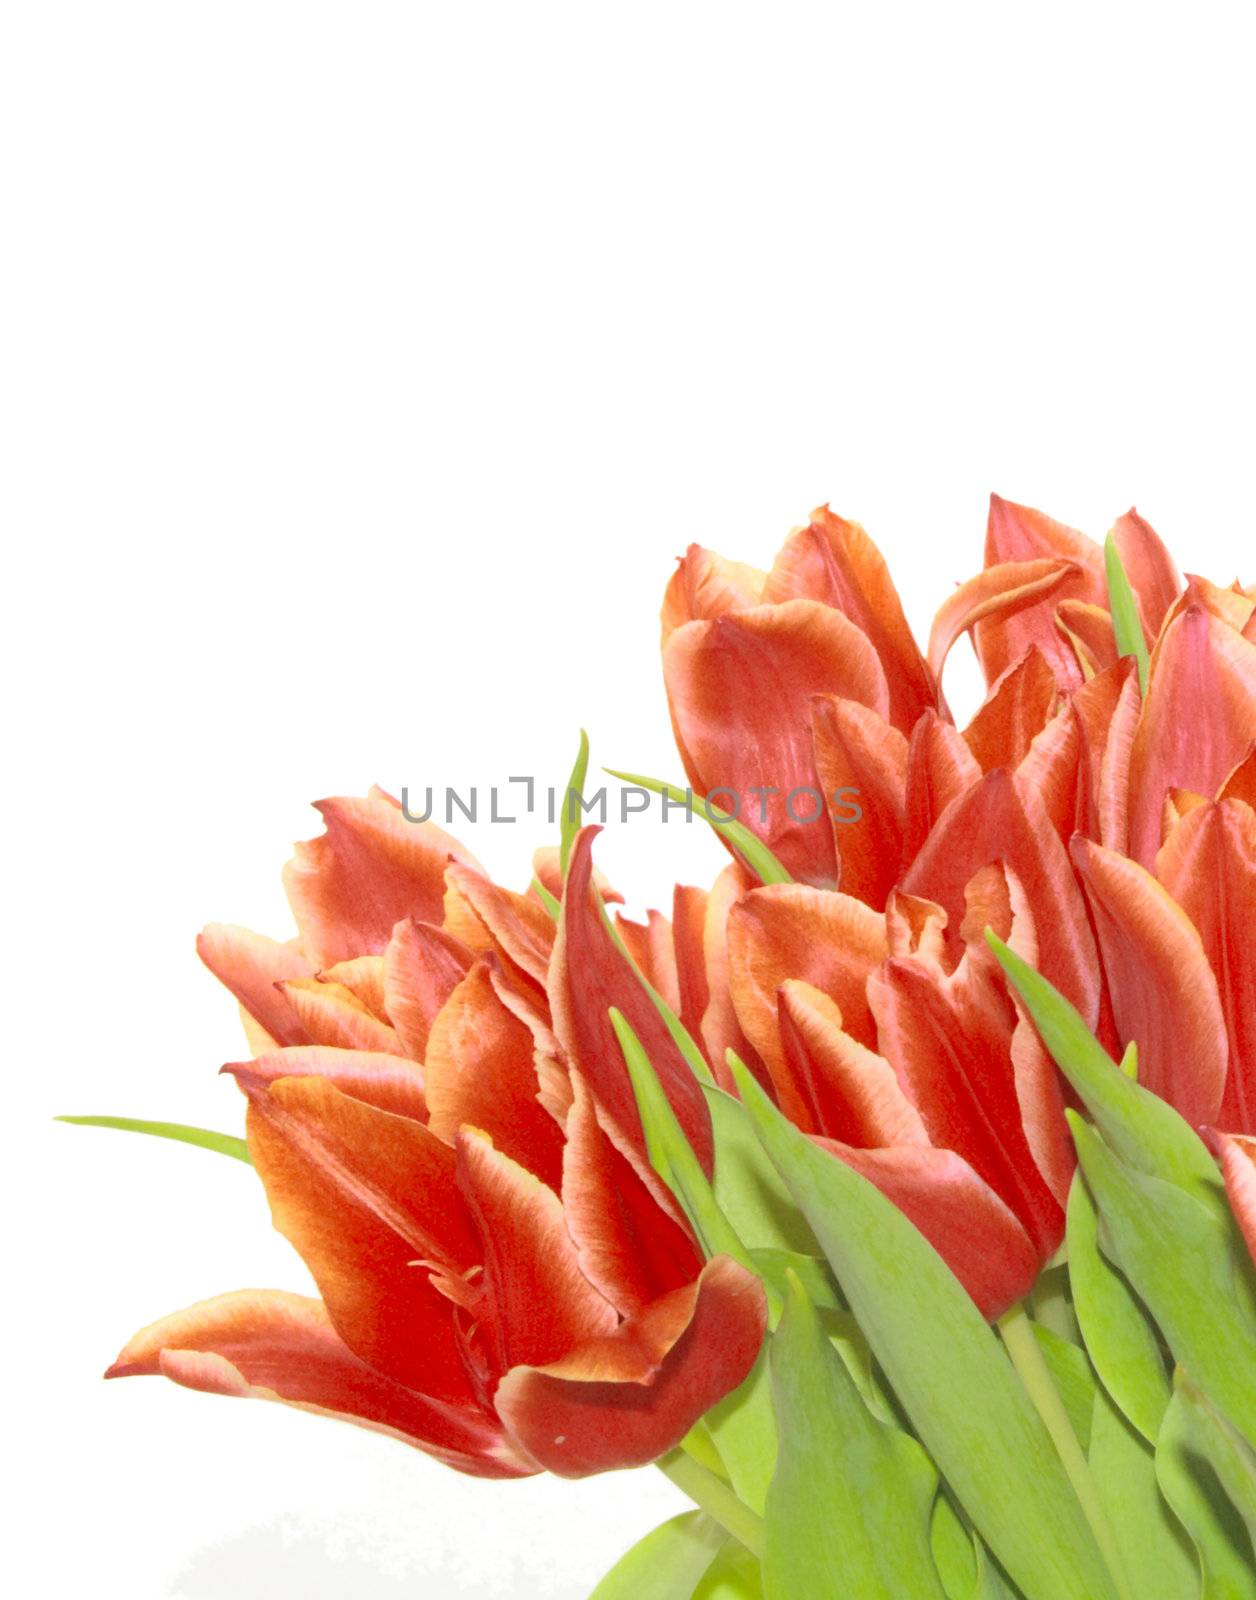 bunch of red tulips by leafy